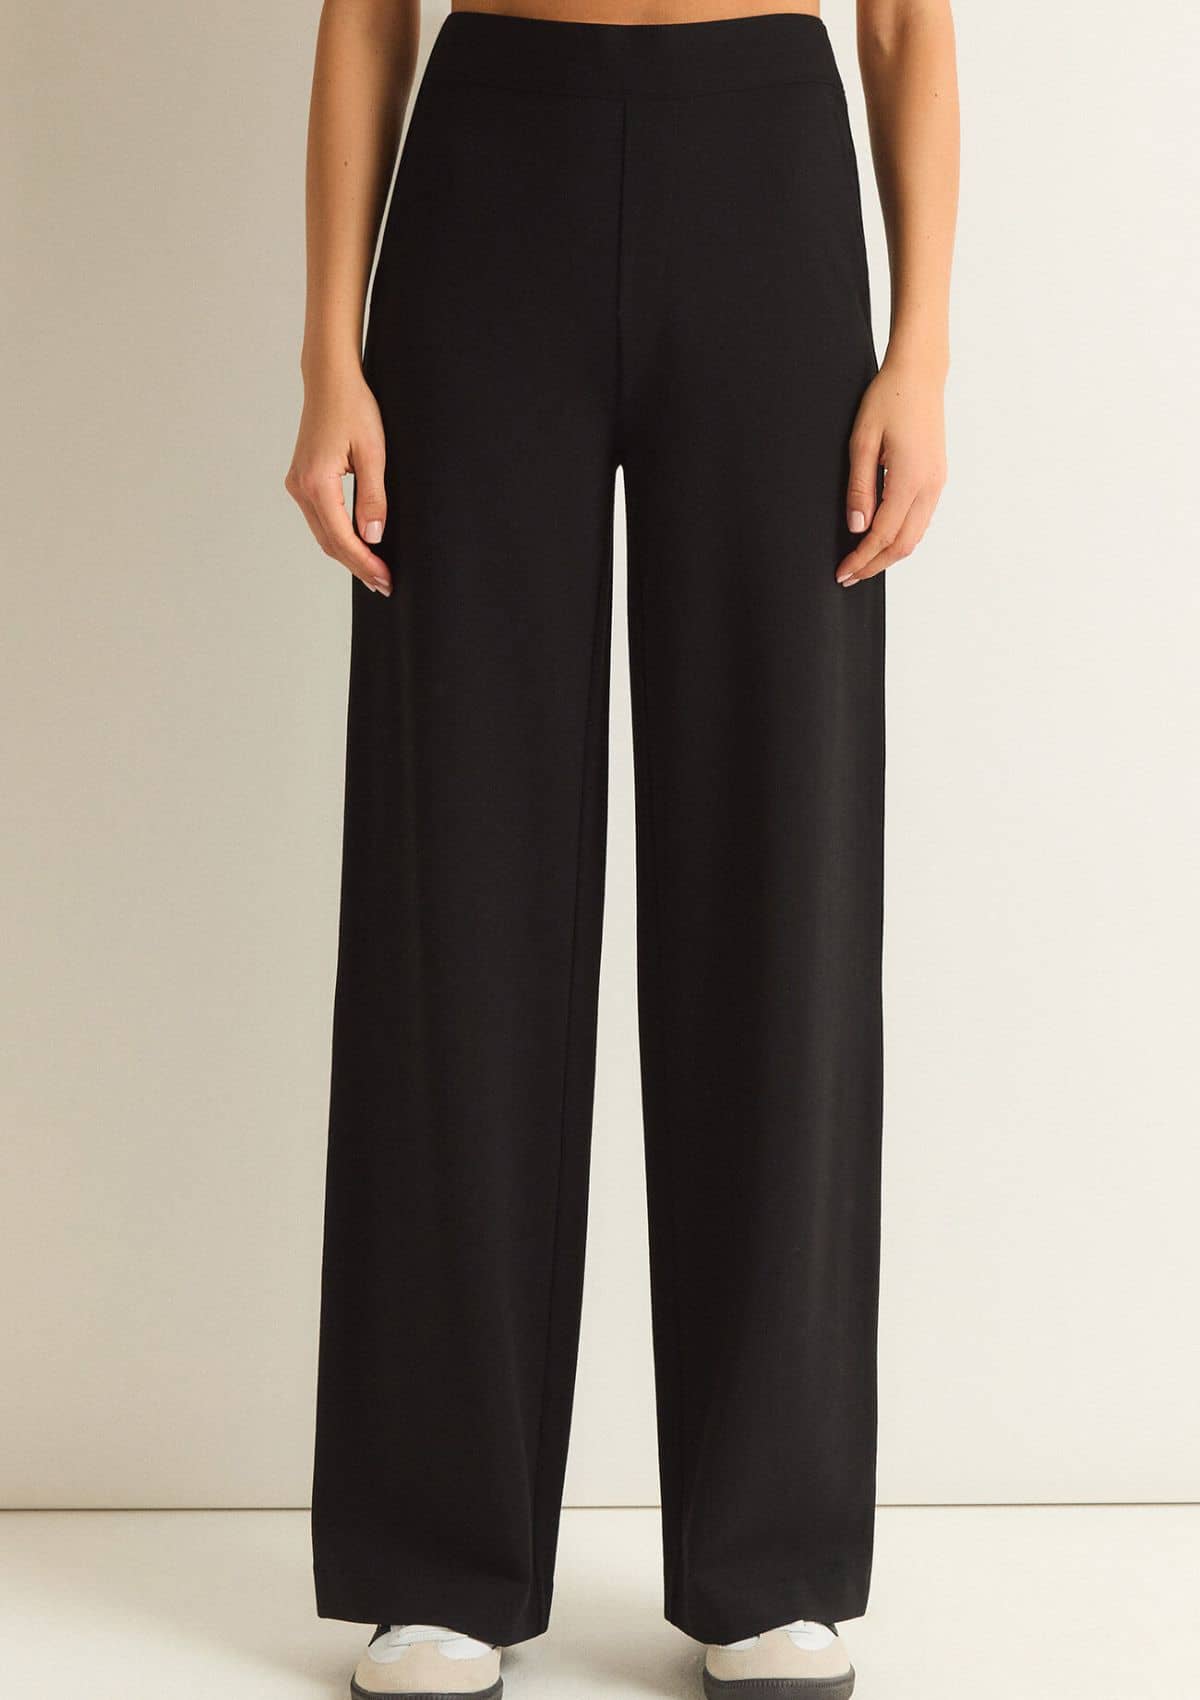 Do It All Trousers -Z SUPPLY- Ruby Jane-